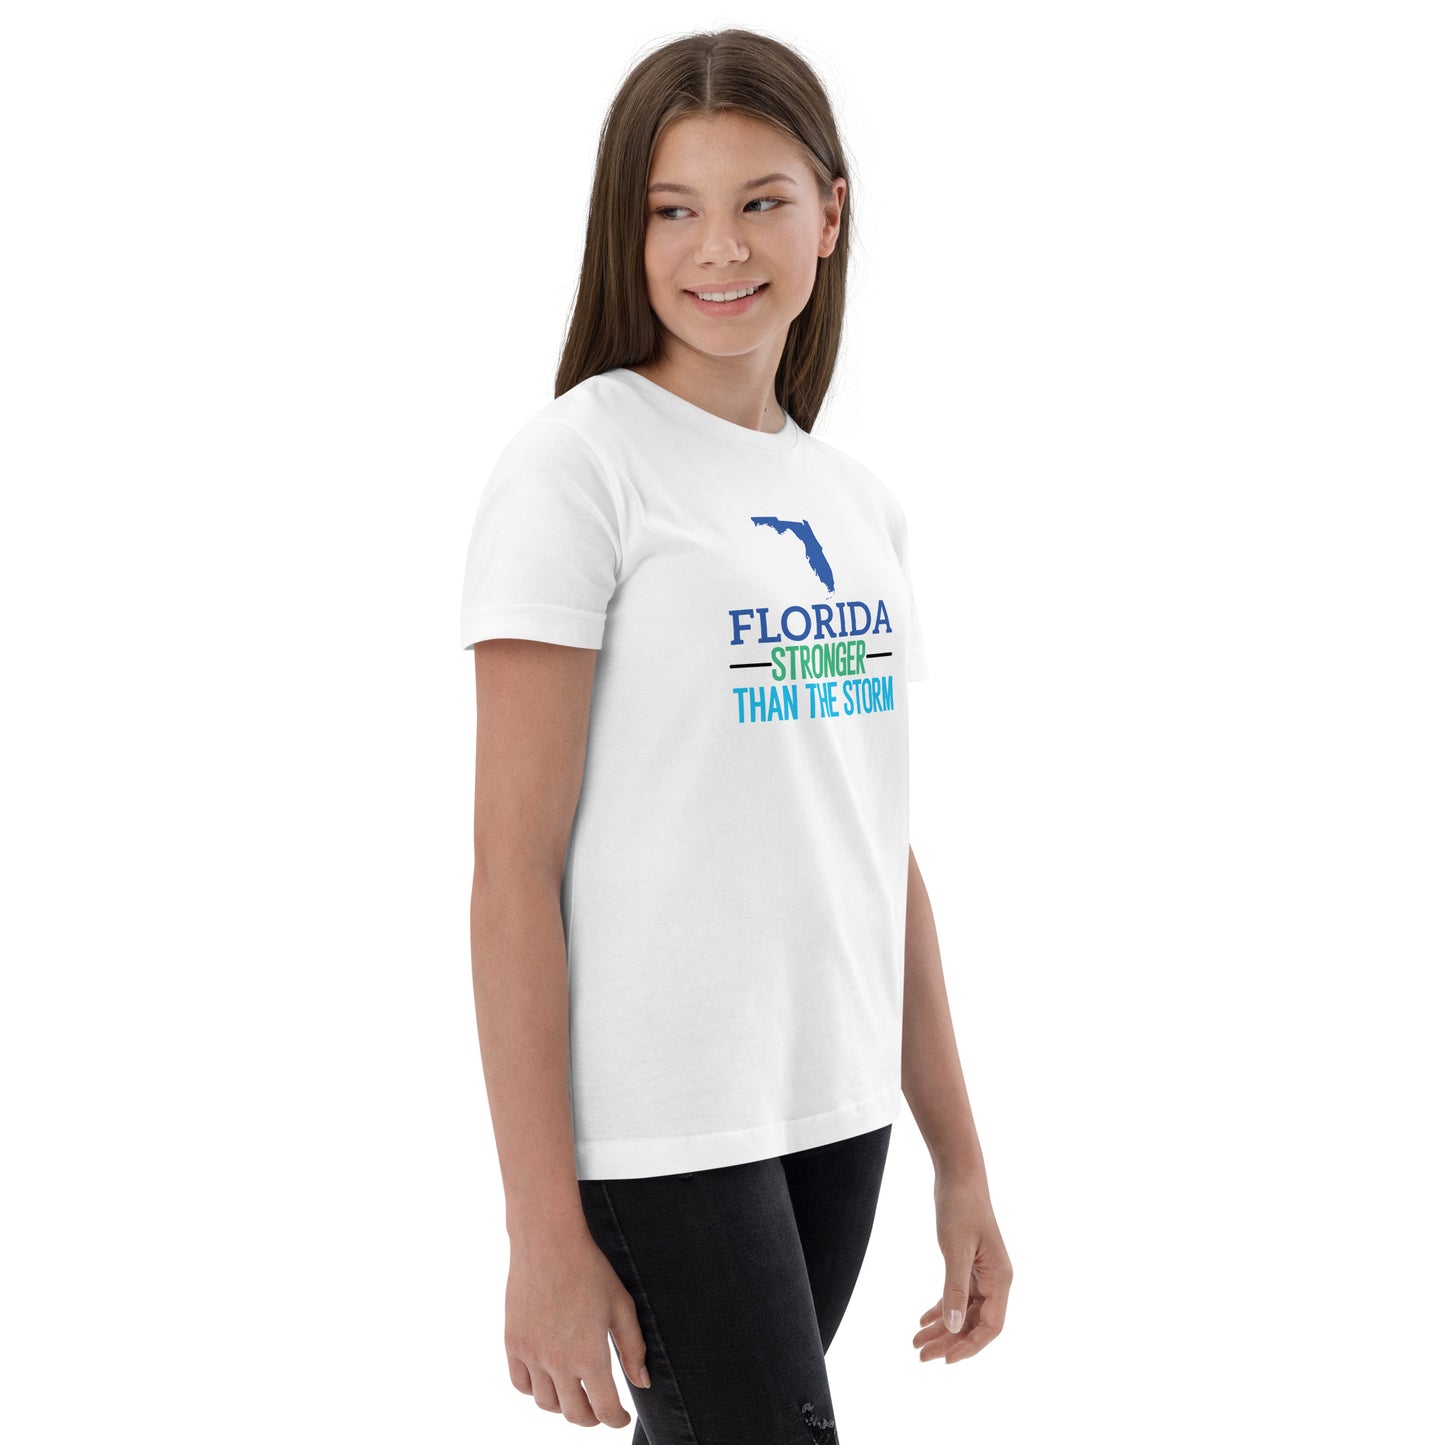 Florida Stronger Than The Storm Youth T-Shirt